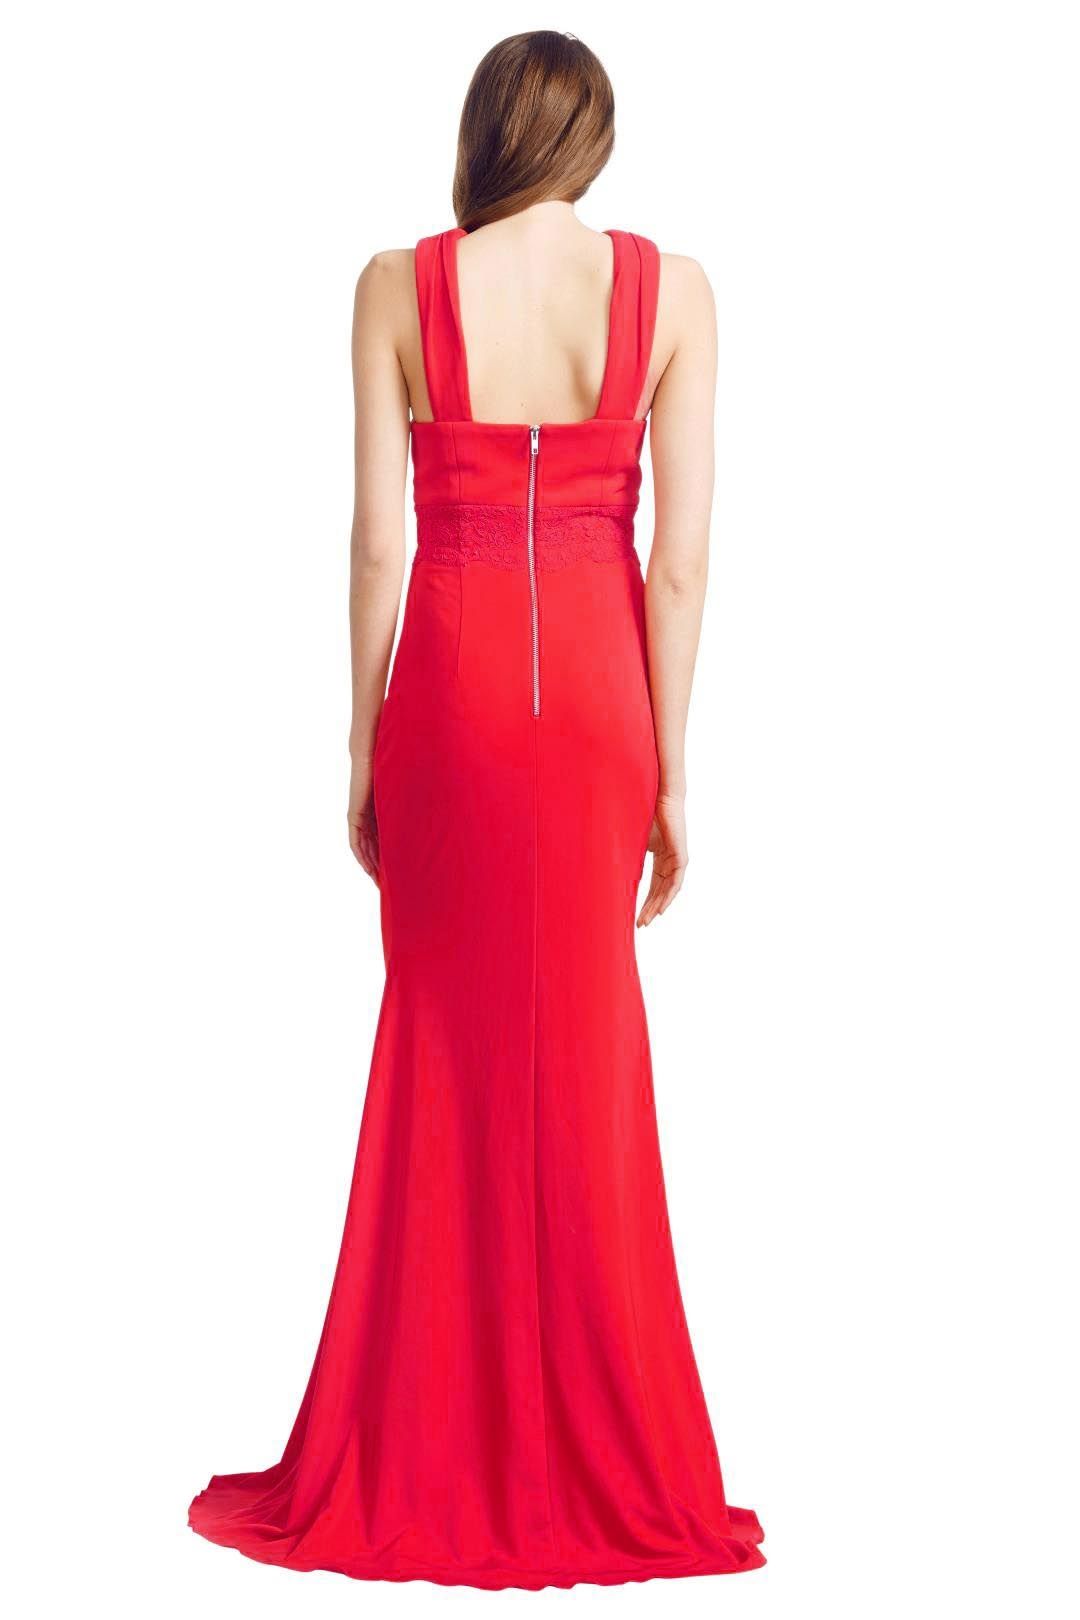 Alex Perry - Aimee Gown - Red - Back